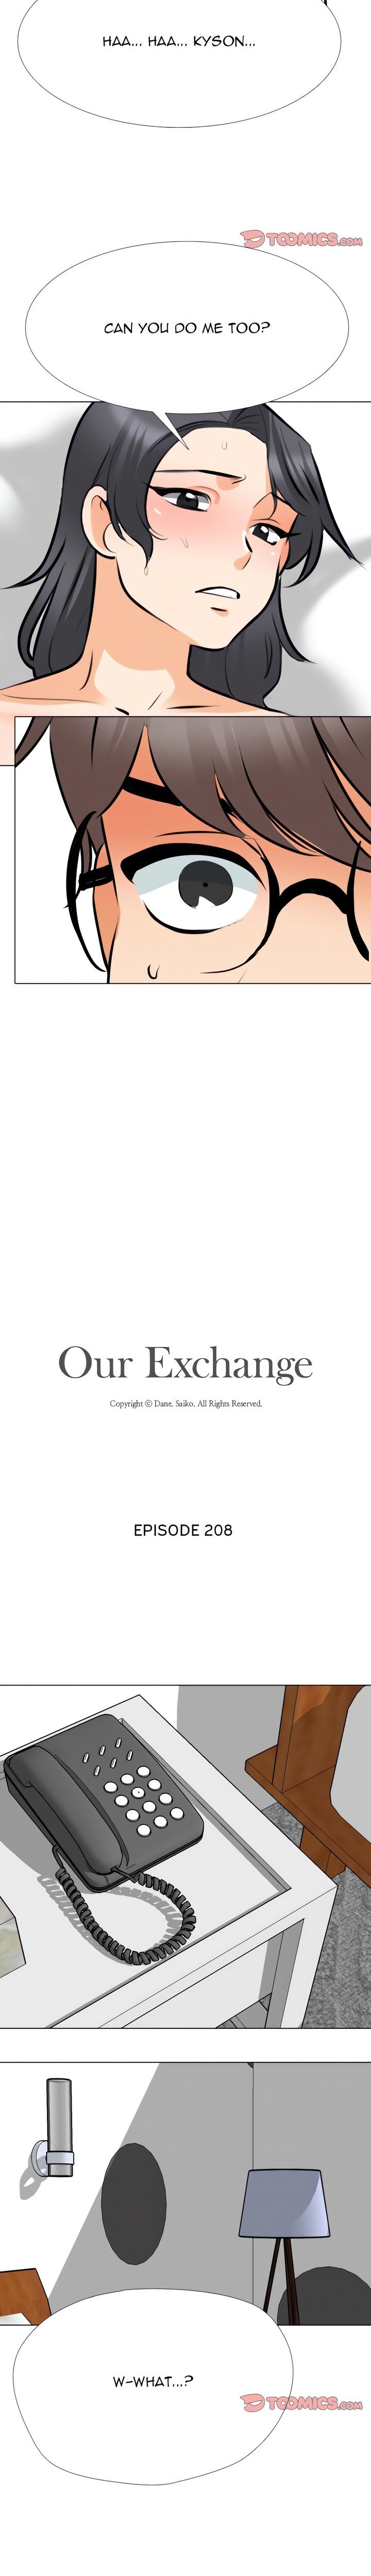 our-exchange-chap-208-1